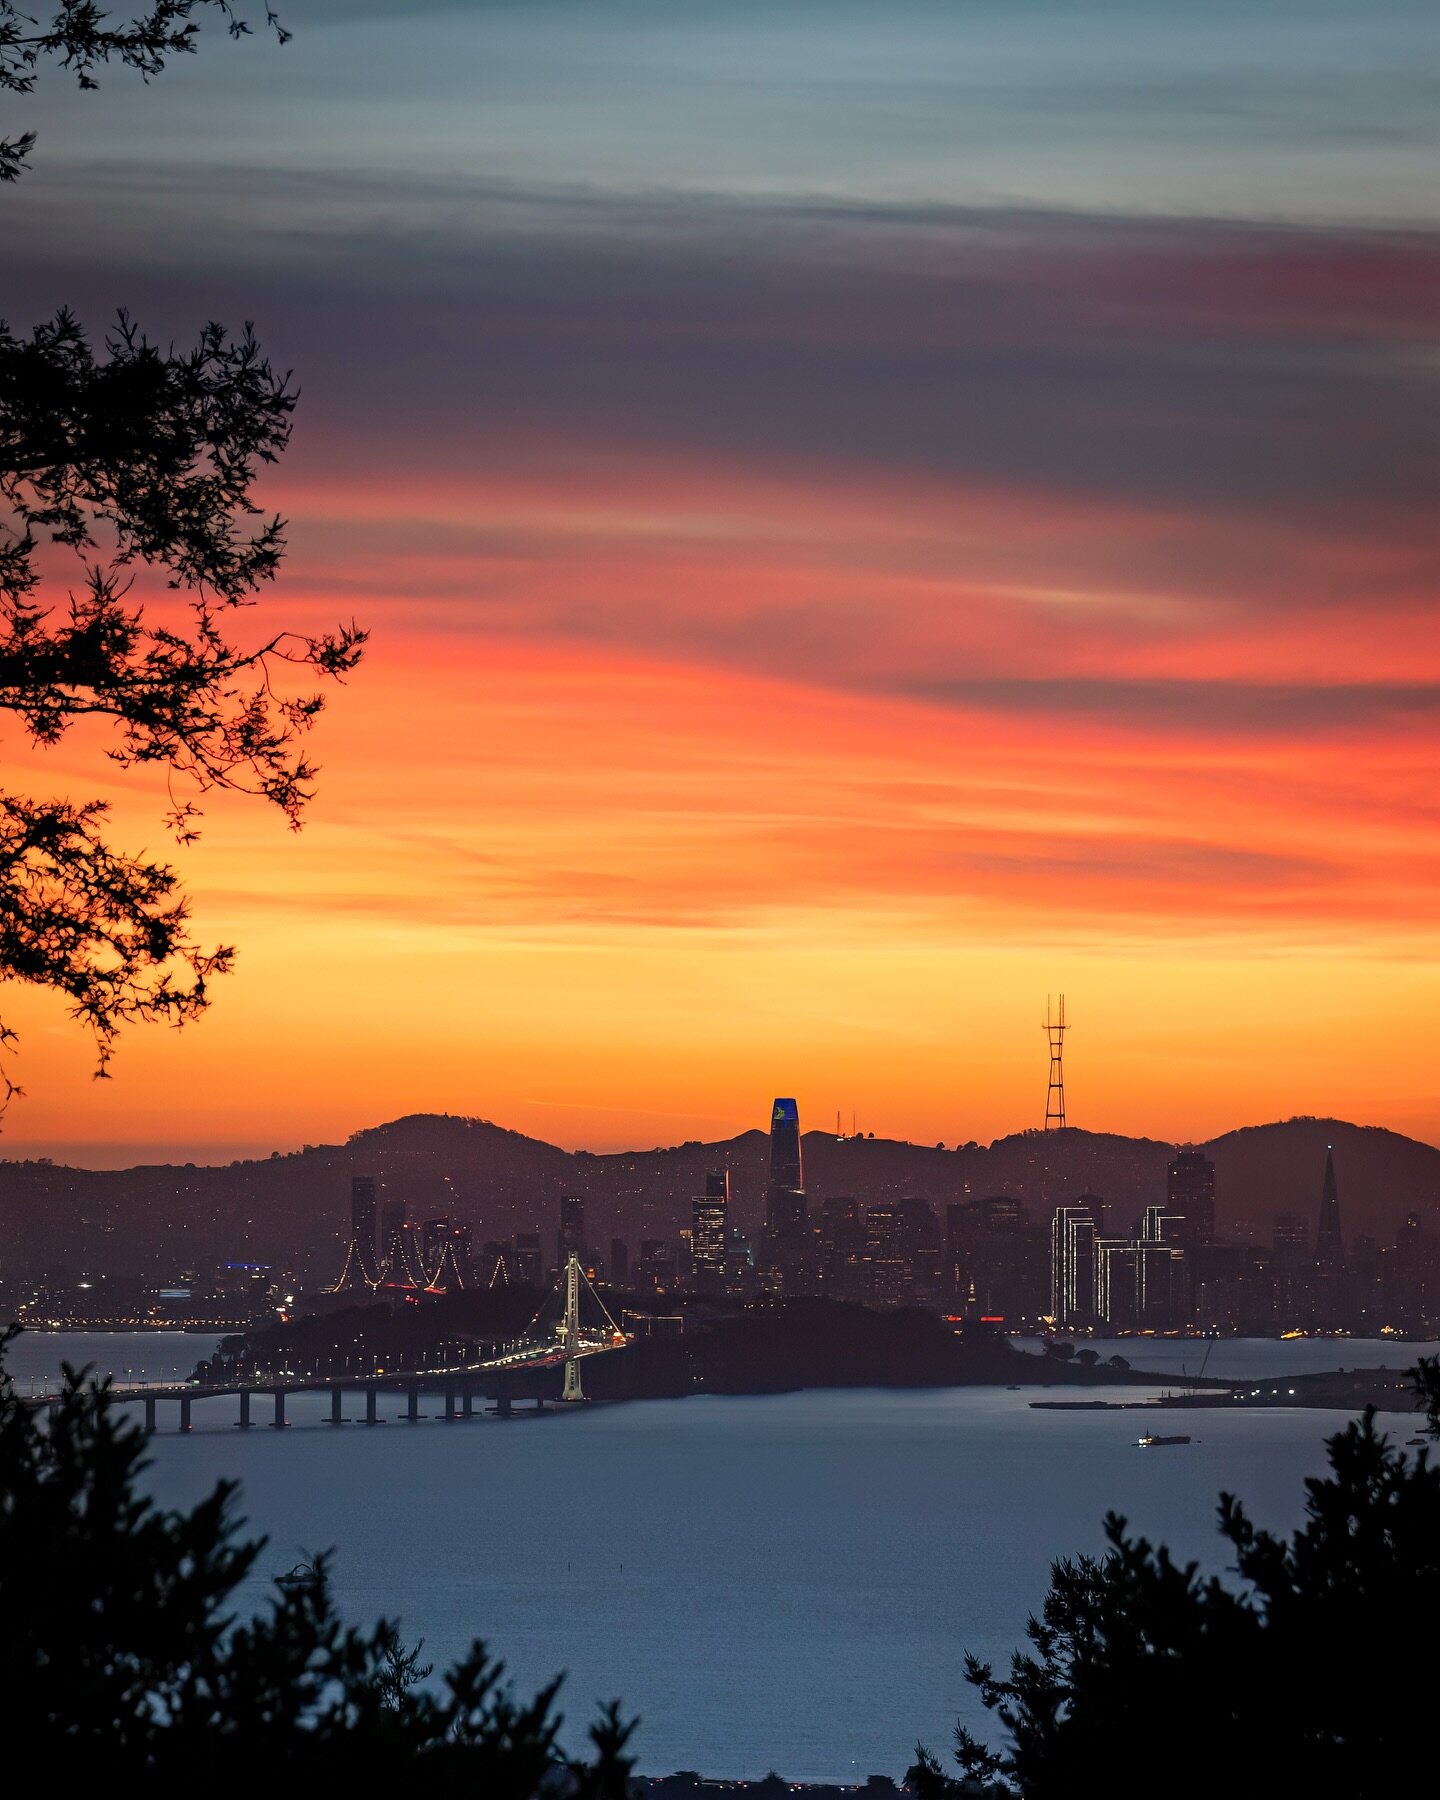 Caught a glimpse of the sunset behind the Bay Bridge in between some trees in the Berkeley hills. These fall sunset colors are pretty magical this time of year. #skyisonfire